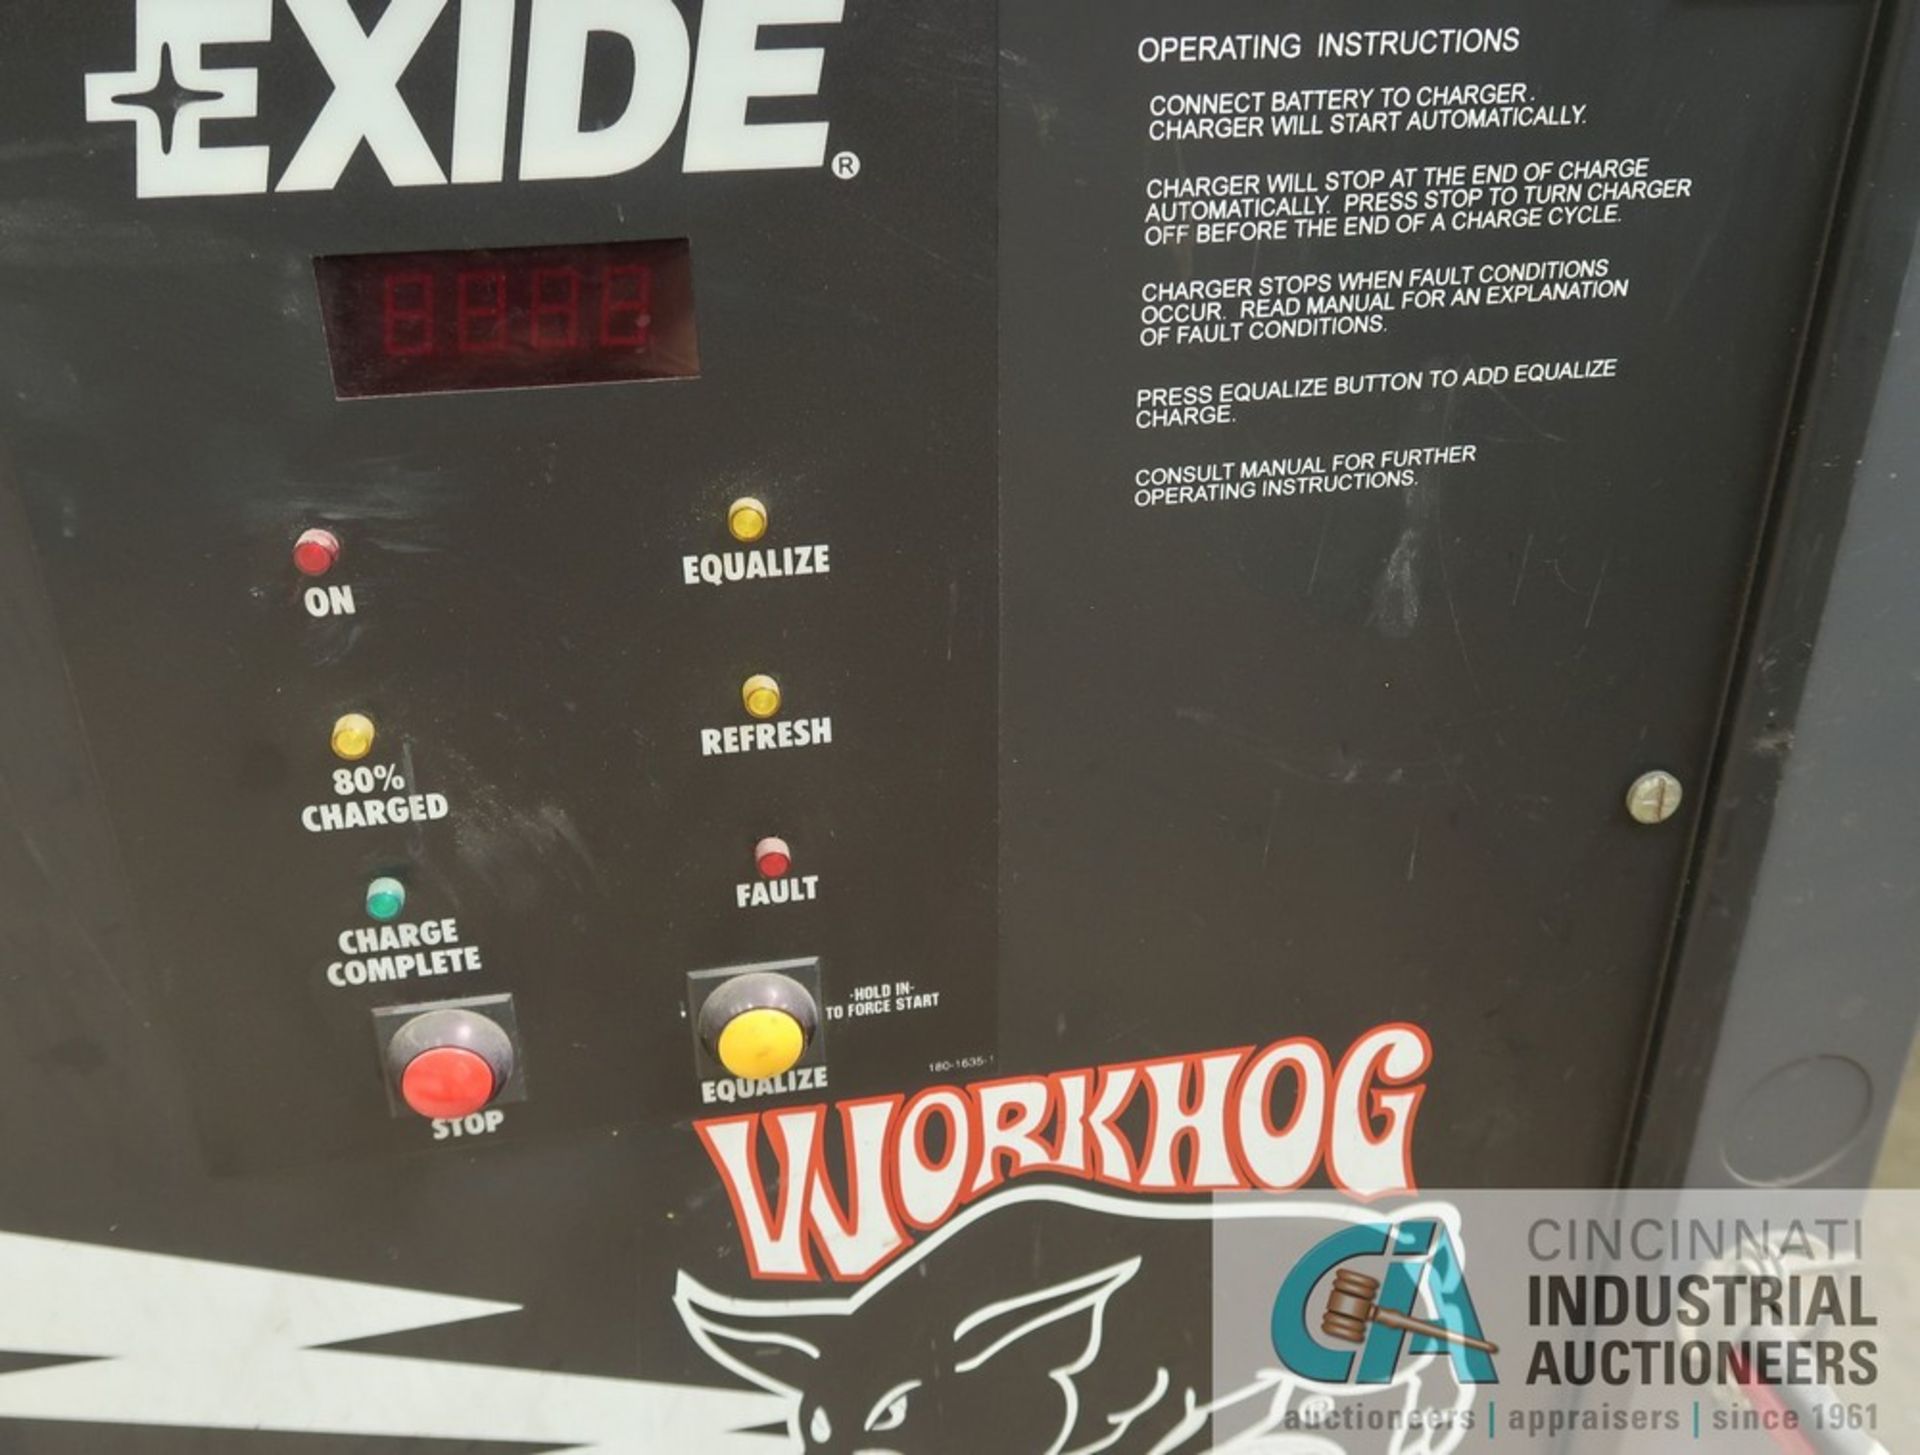 48-VOLT EXIDE MODEL W3-24-550 BATTERY CHARGER; S/N YG35349, 3-PHASE, 48 DC VOLTS, 480 AC VOLTS - Image 4 of 6